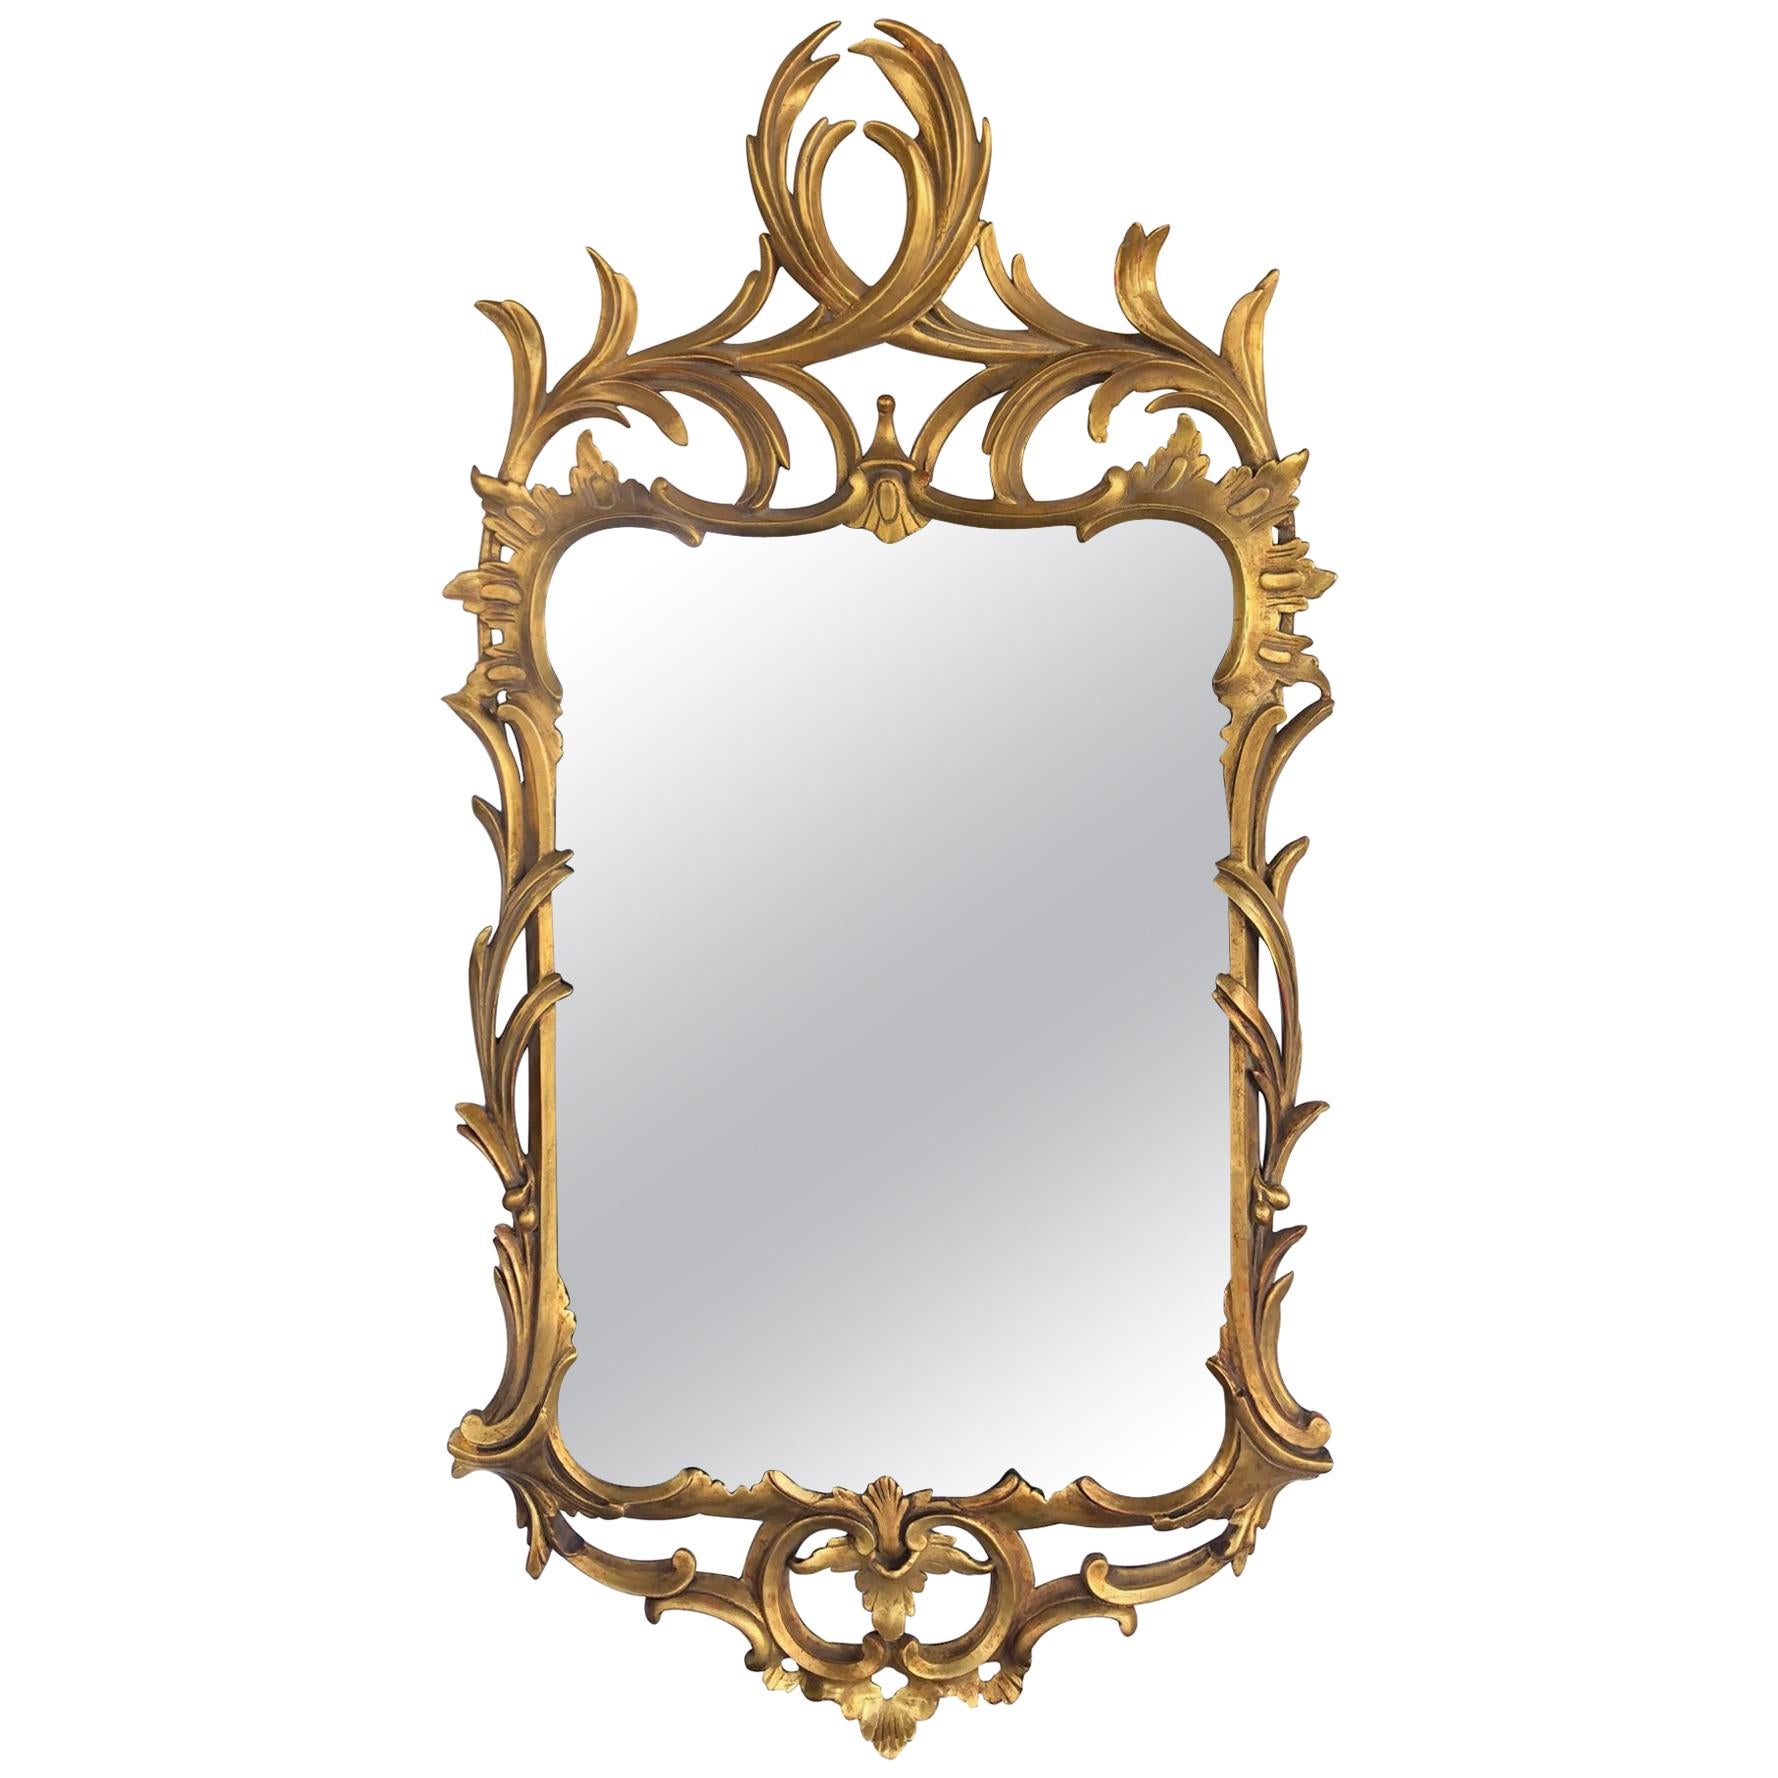 Hand-Carved Continental Rococo Revival Foliate Giltwood Mirror